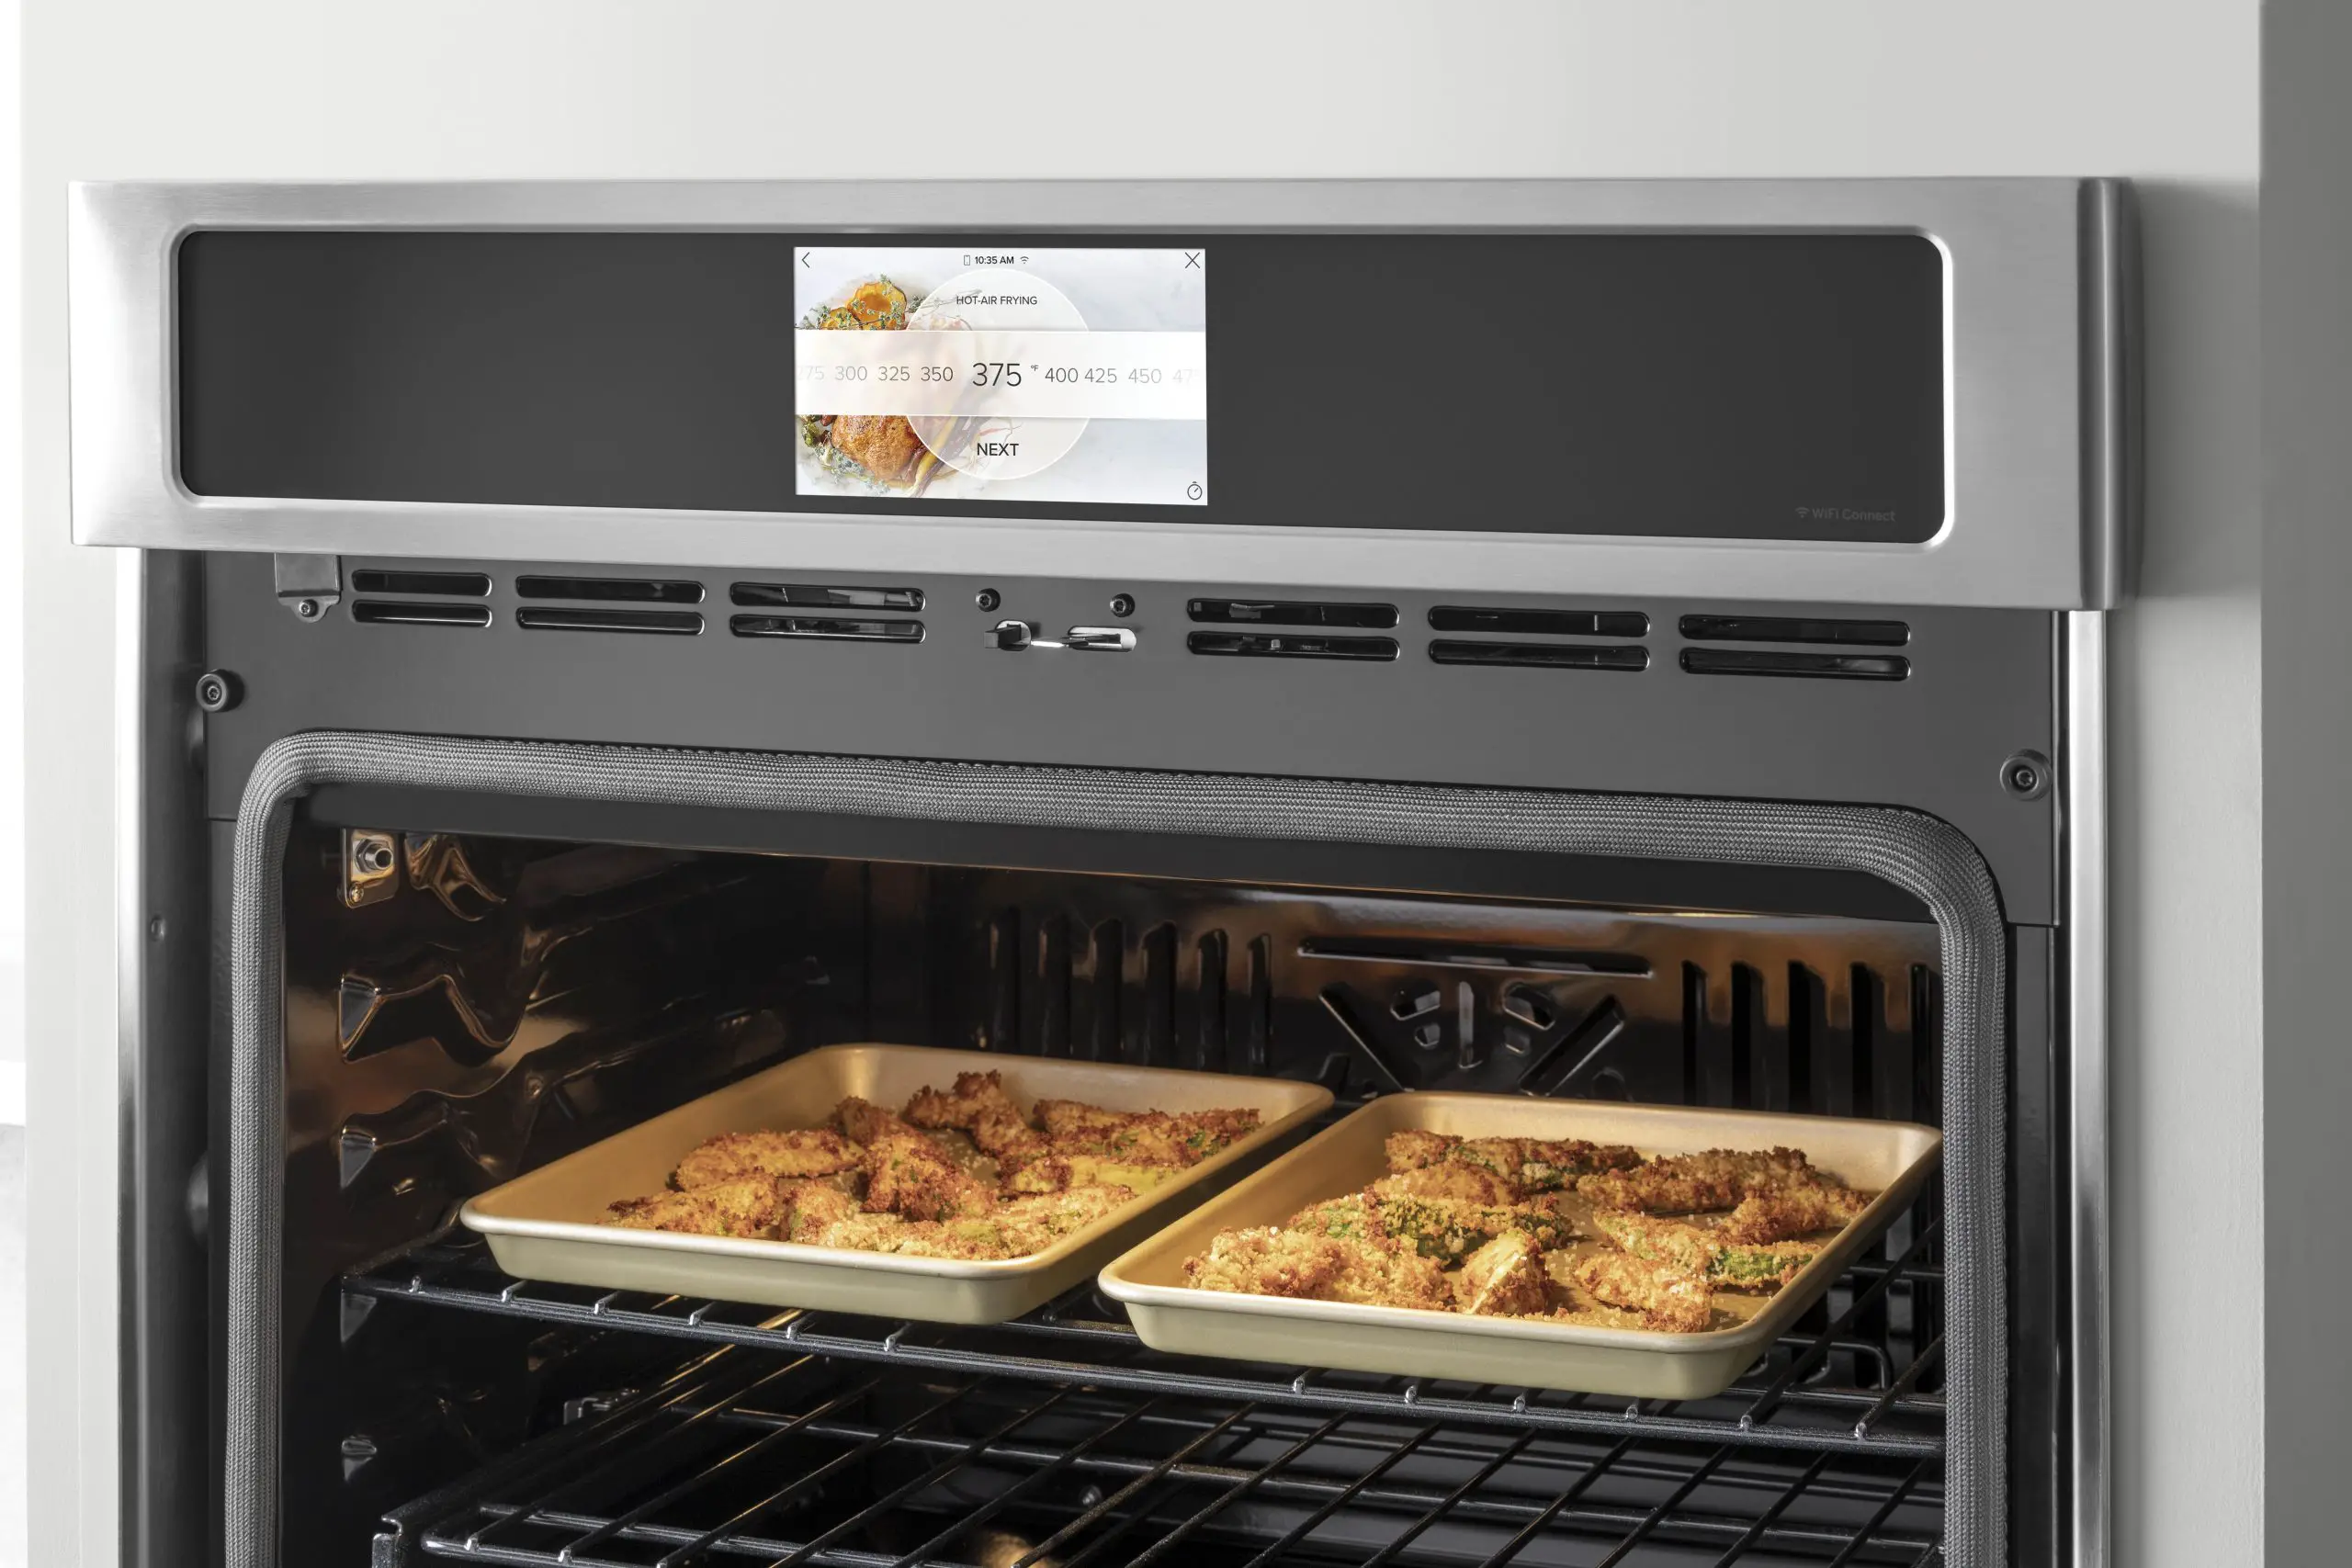 GE Appliances Launches Popular Air Fry Technology in New Wall Ovens ...